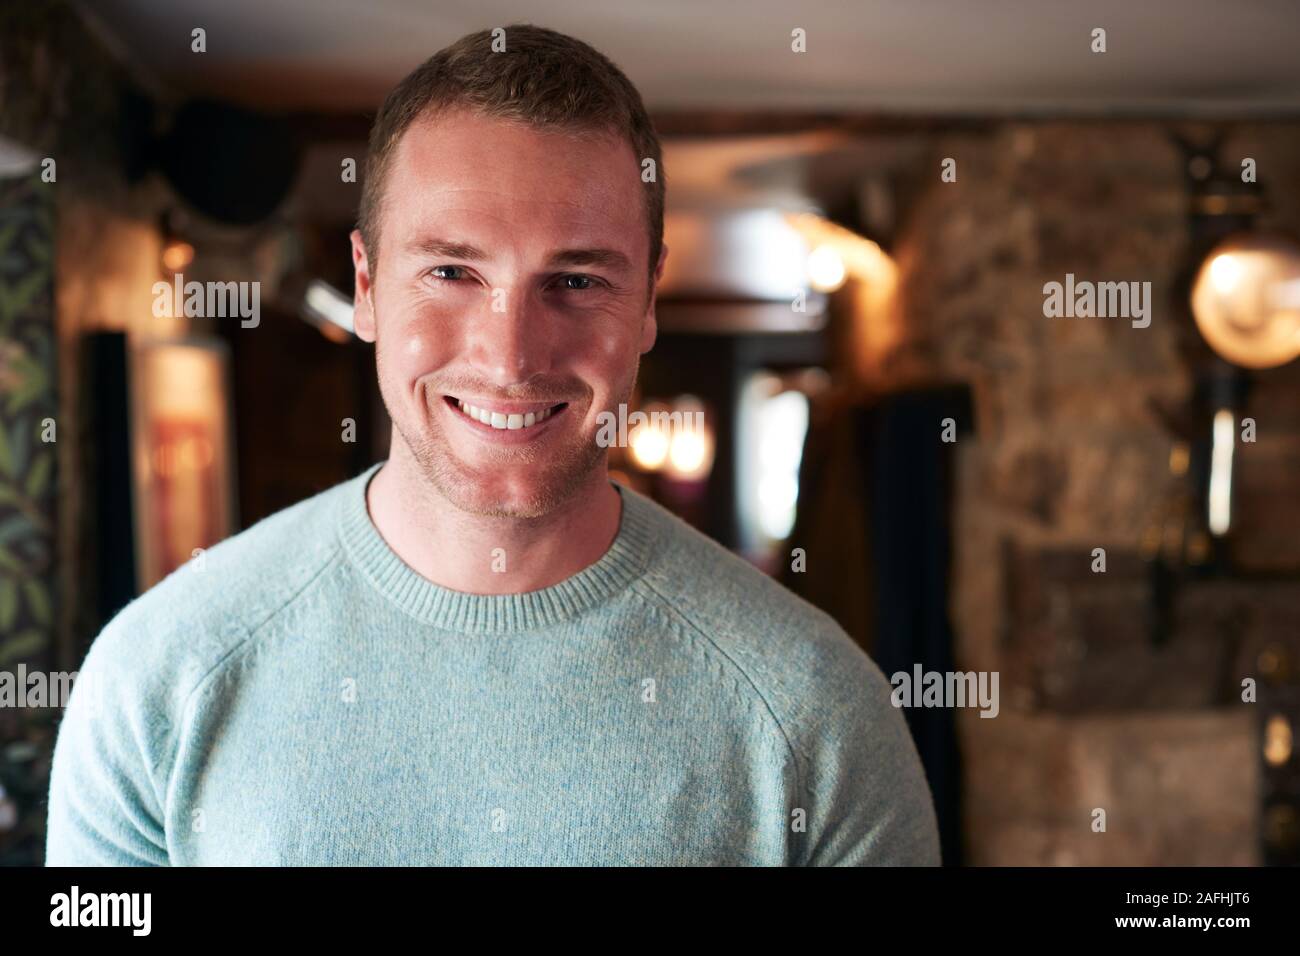 Portrait Of Smiling Male Receptionist Working  At Hotel Check In Stock Photo